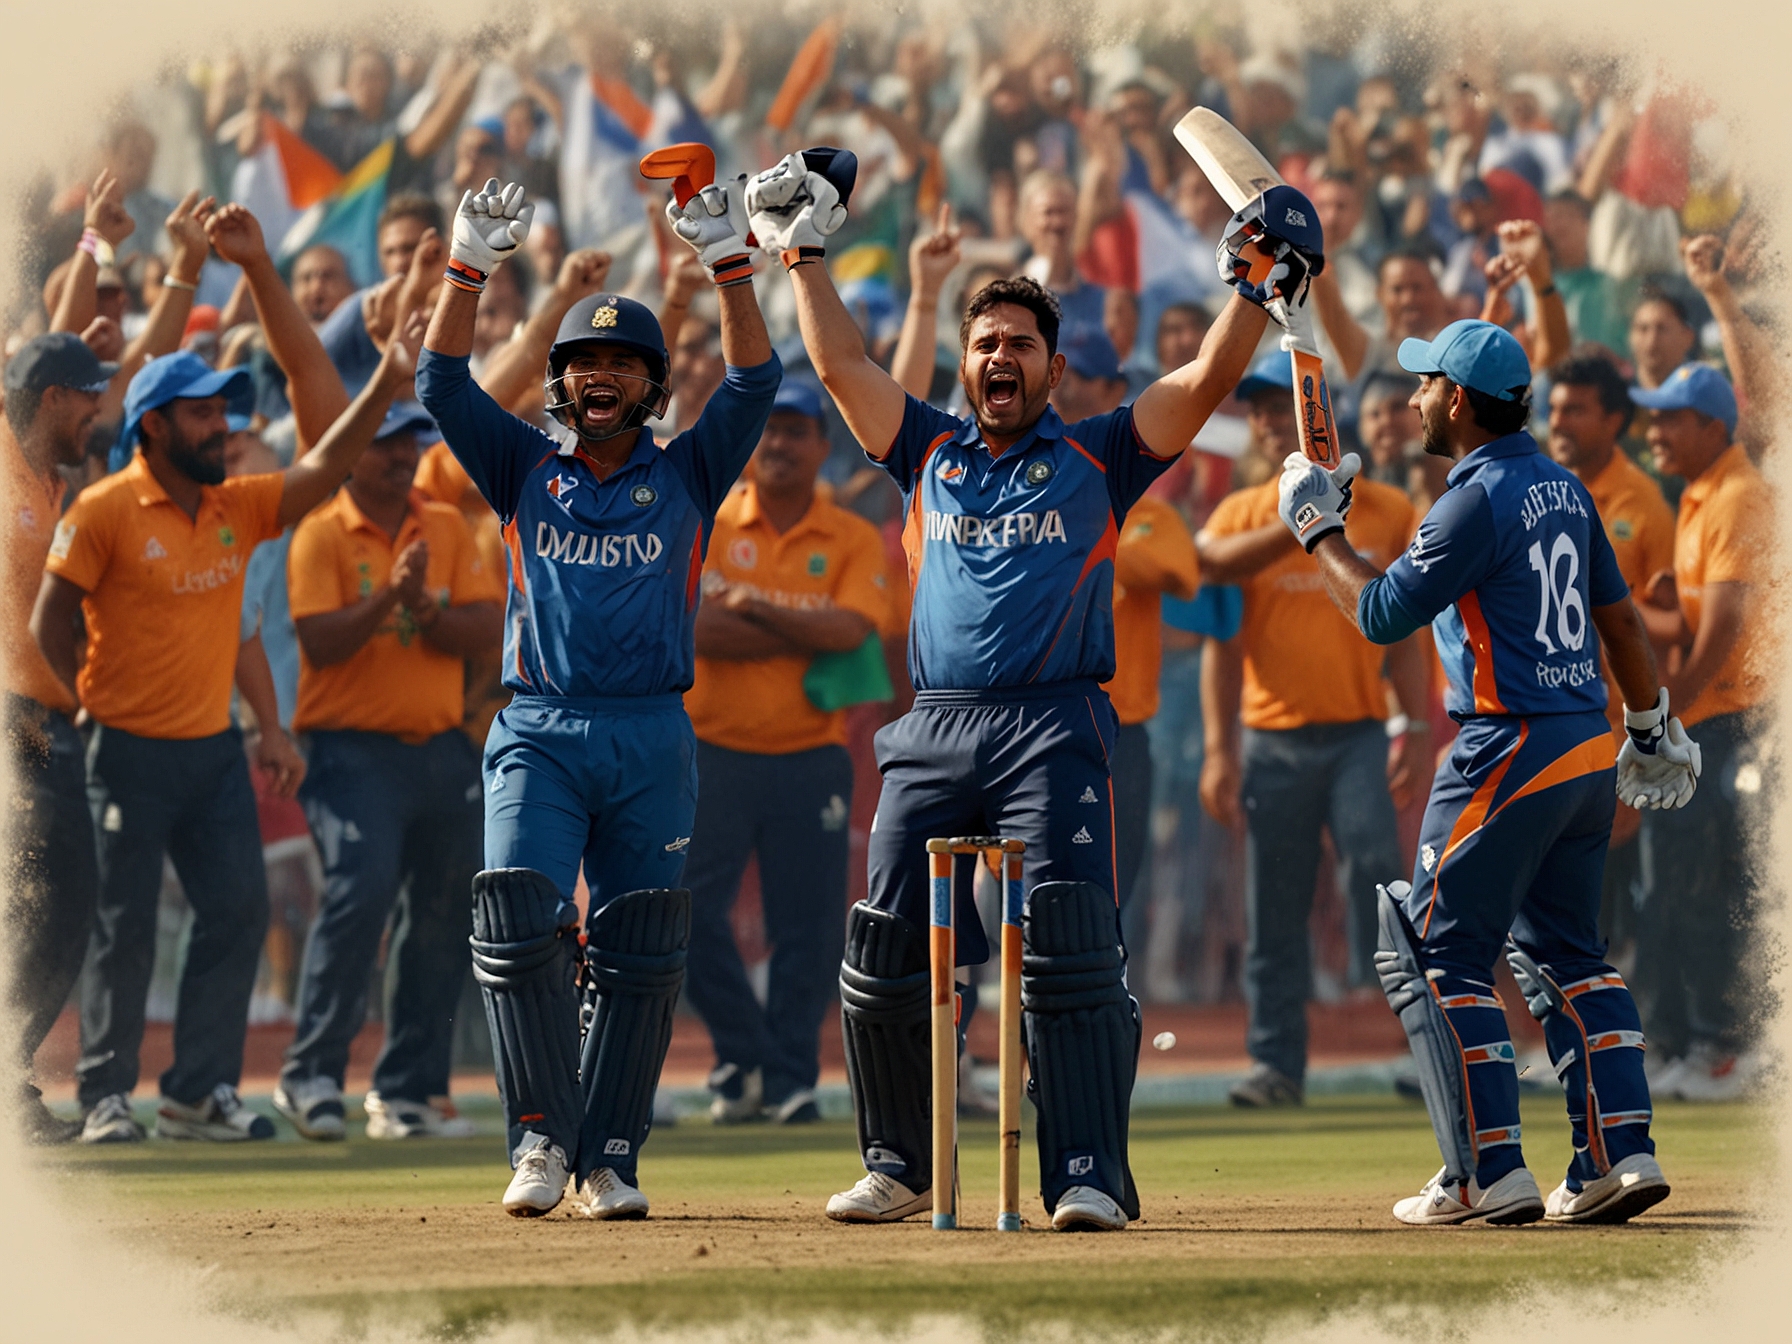 A dynamic scene from a T20 cricket match, capturing the excitement and intensity of the ICC T20 World Cup, with fans cheering and players in action.